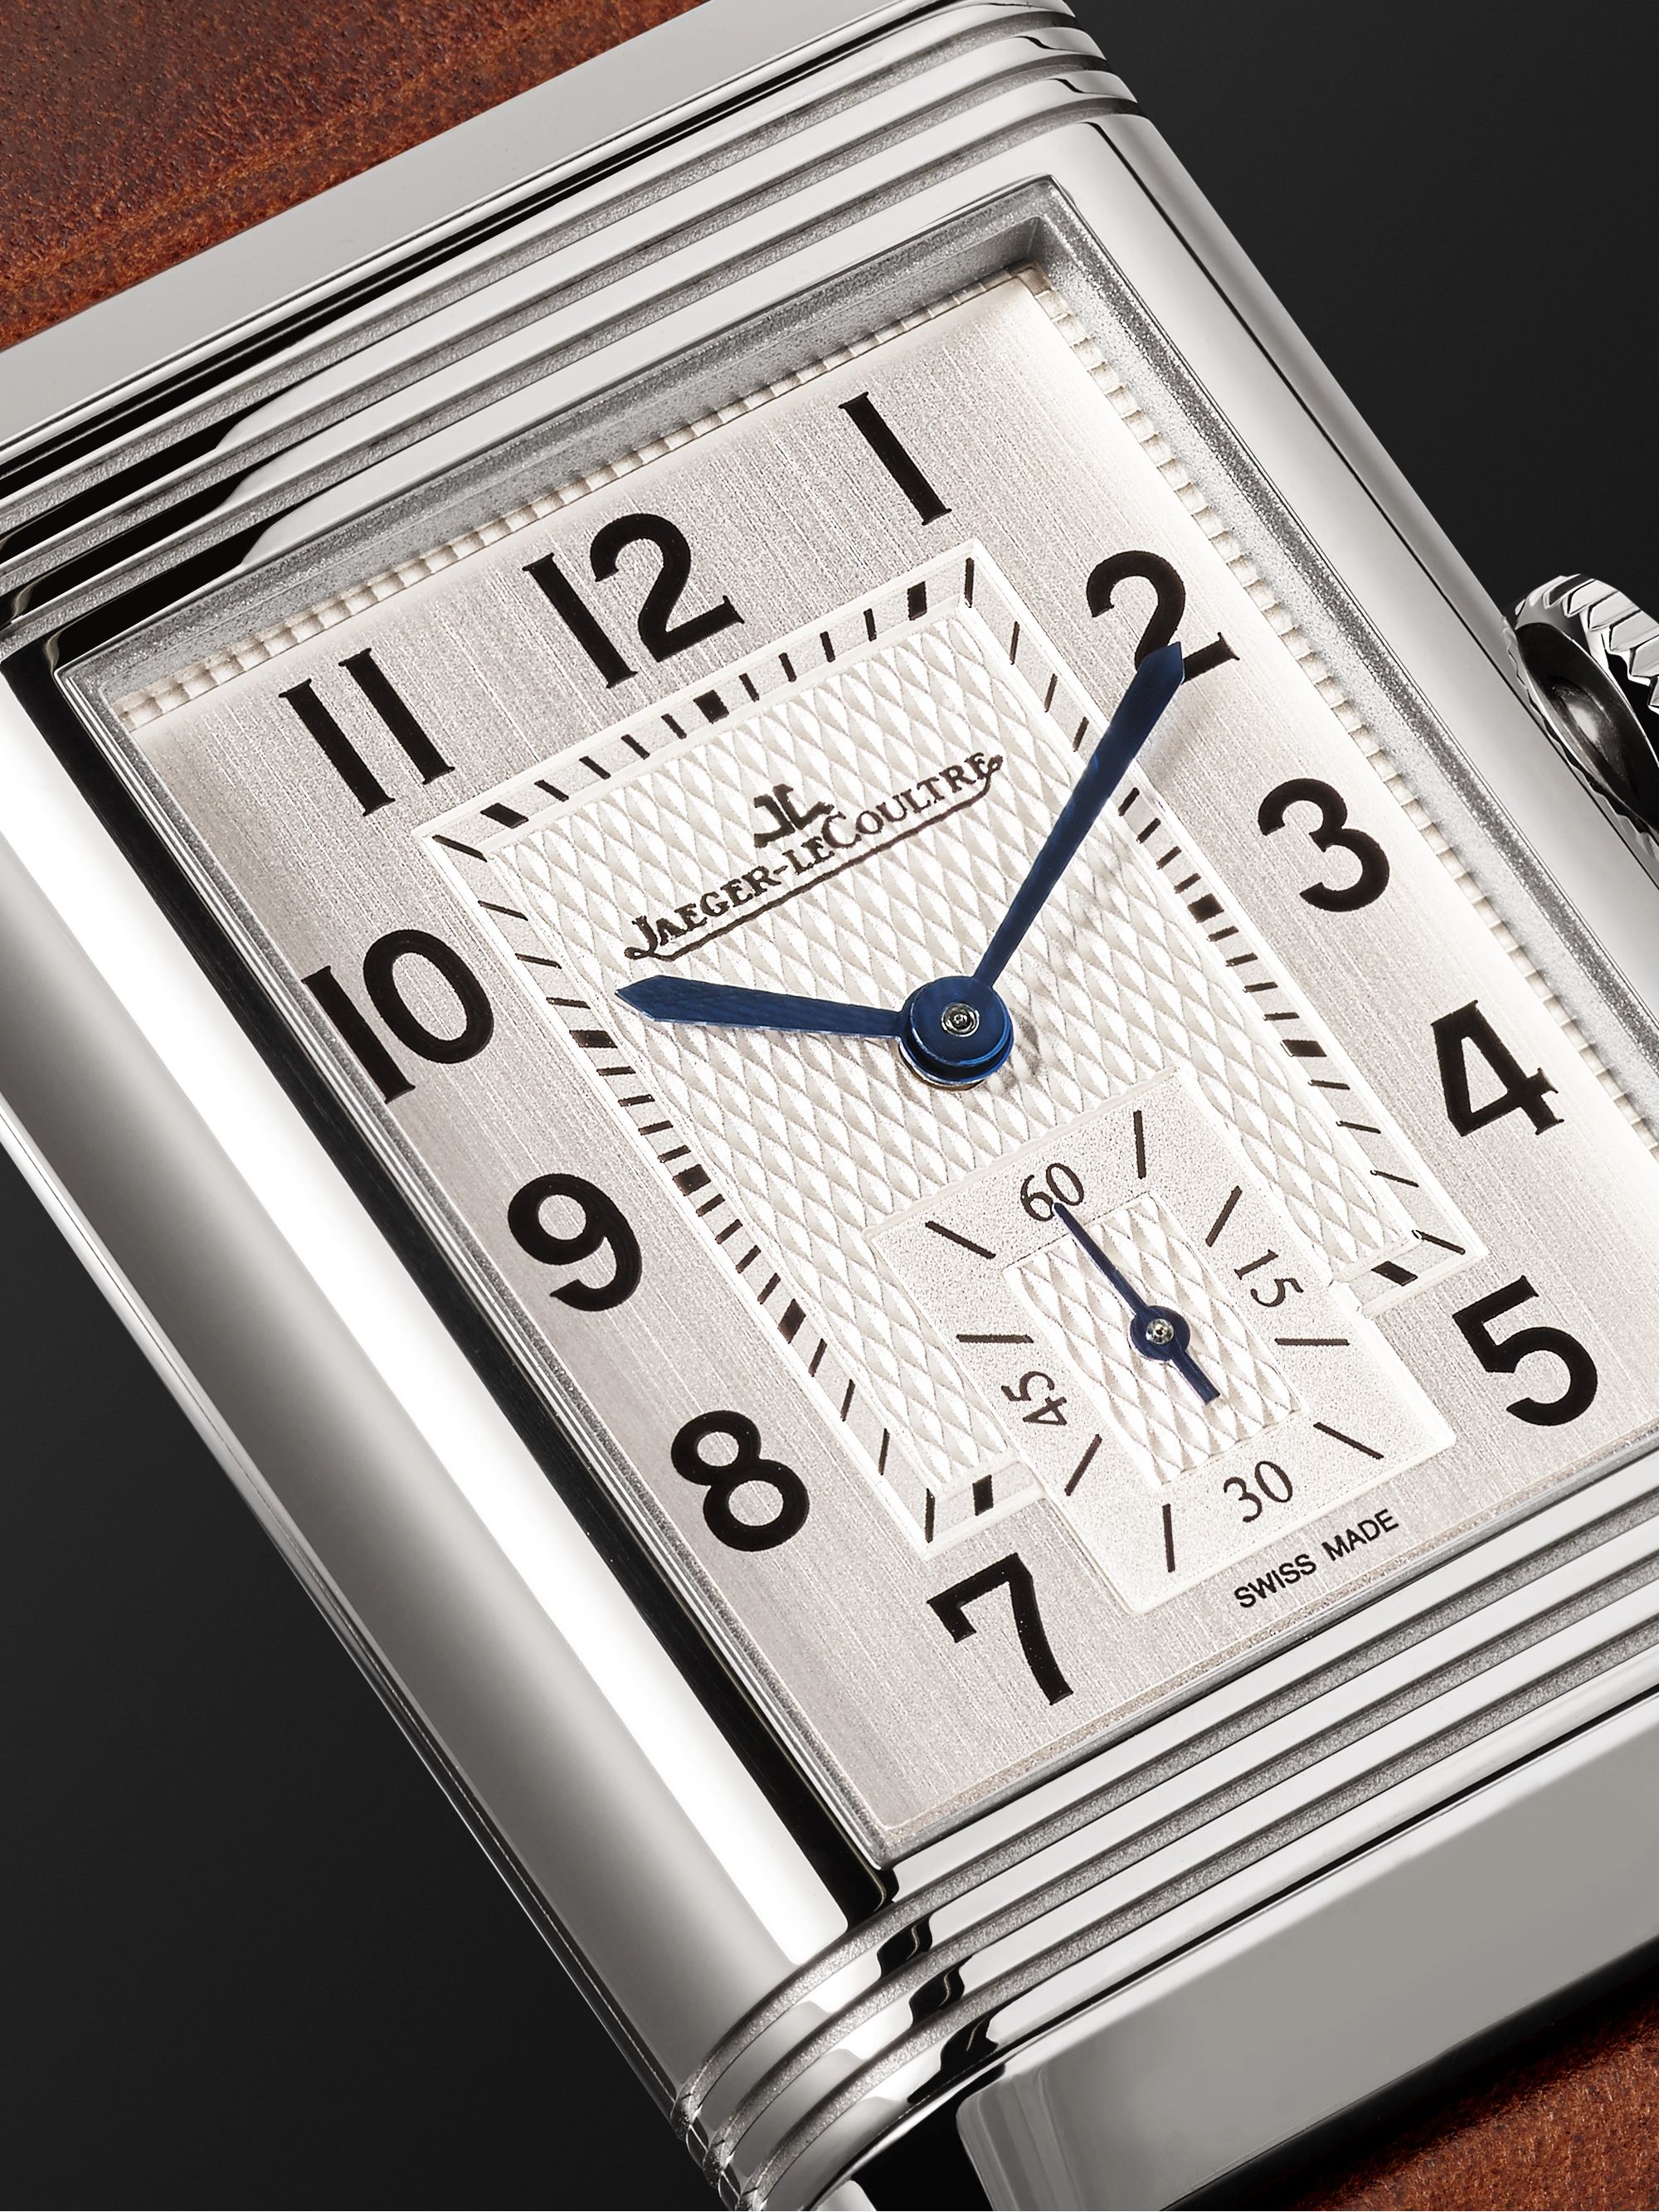 JAEGER-LECOULTRE Reverso Classic Large 27mm Stainless Steel and Leather Watch